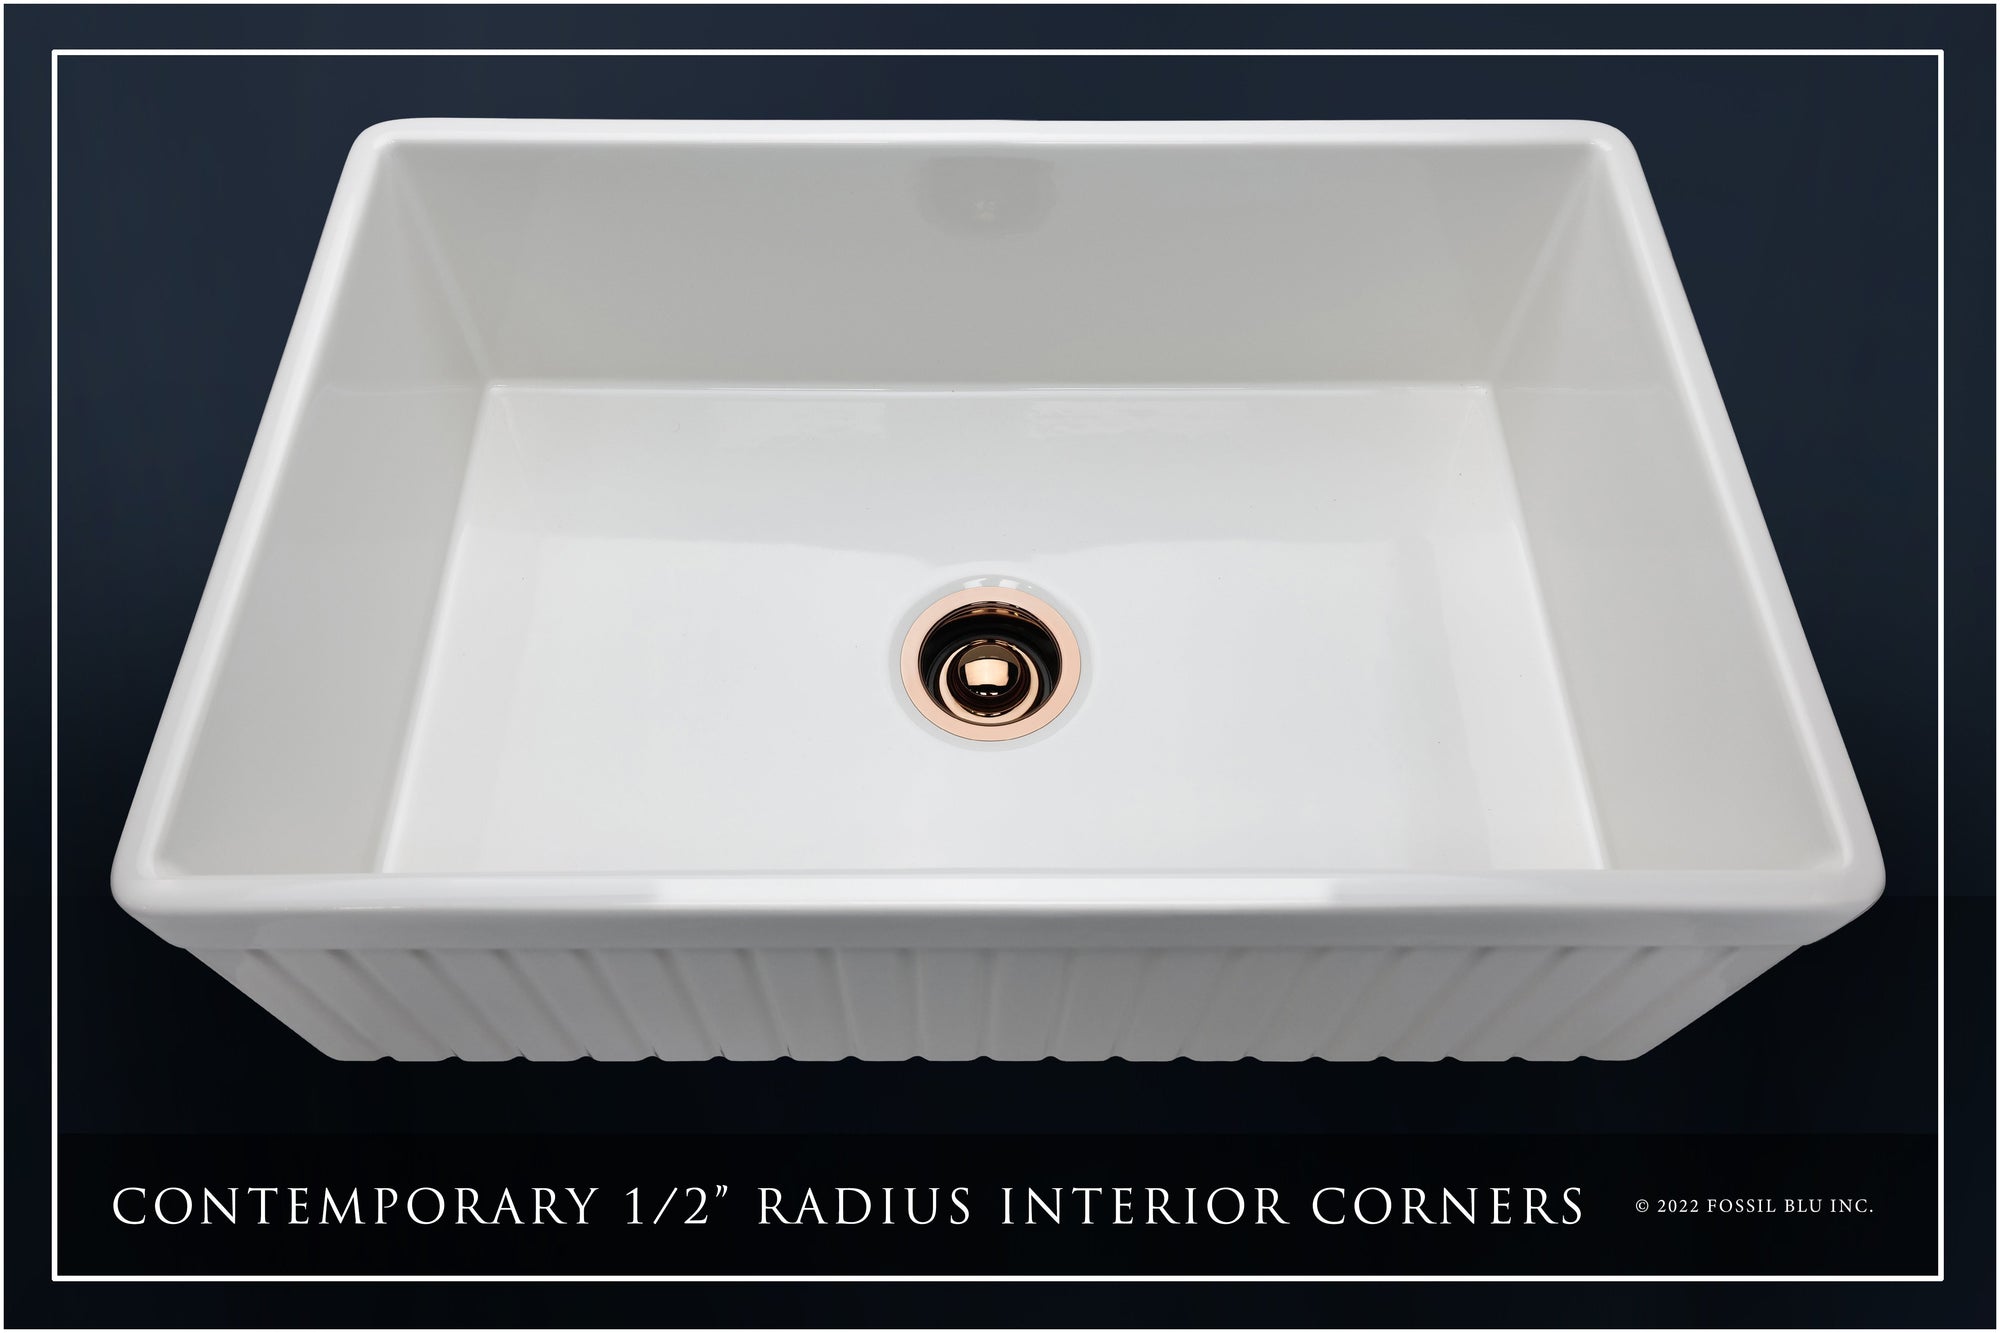 FSW1007RG LUXURY 33-INCH SOLID FIRECLAY FARMHOUSE SINK IN WHITE, POL. ROSE GOLD ACCS, FLUTED FRONT